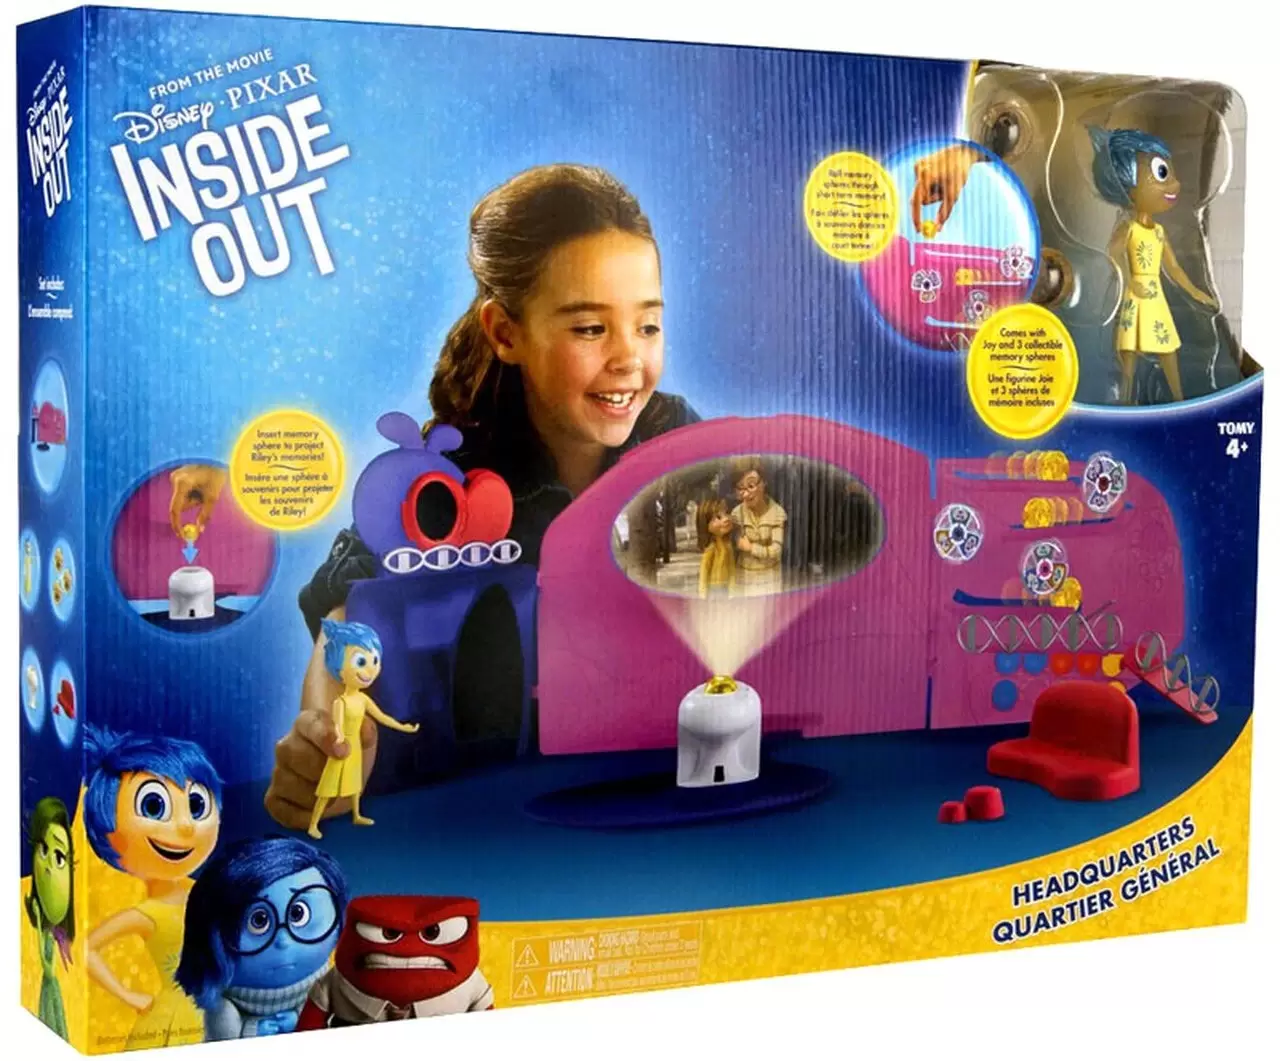 Inside Out - Tomy - Headquarters Playset